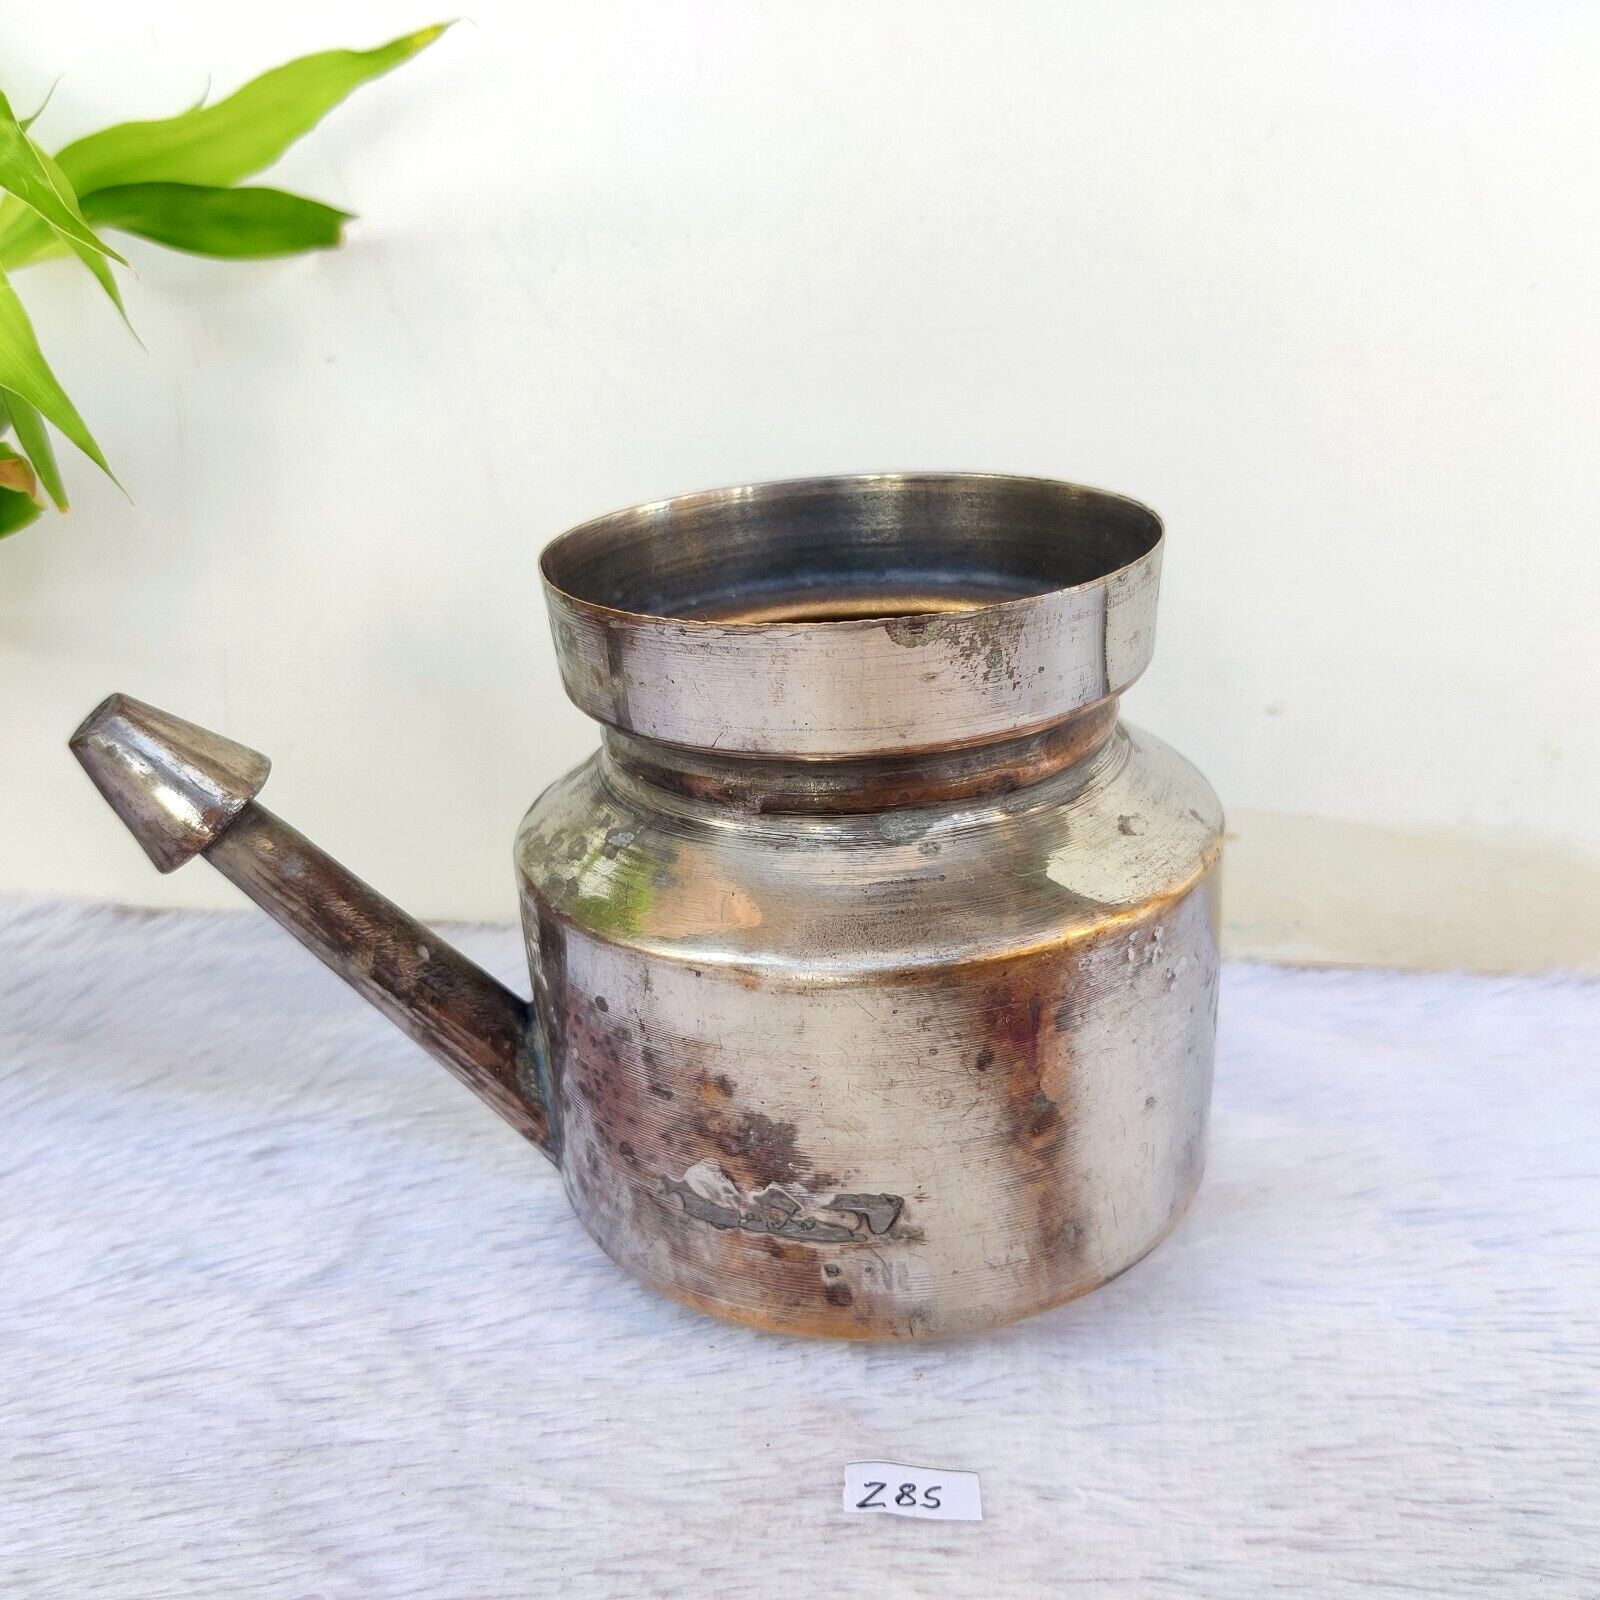 Vintage Old Nickel Coated Brass Water Pot With Spout Decorative Collectible Z85